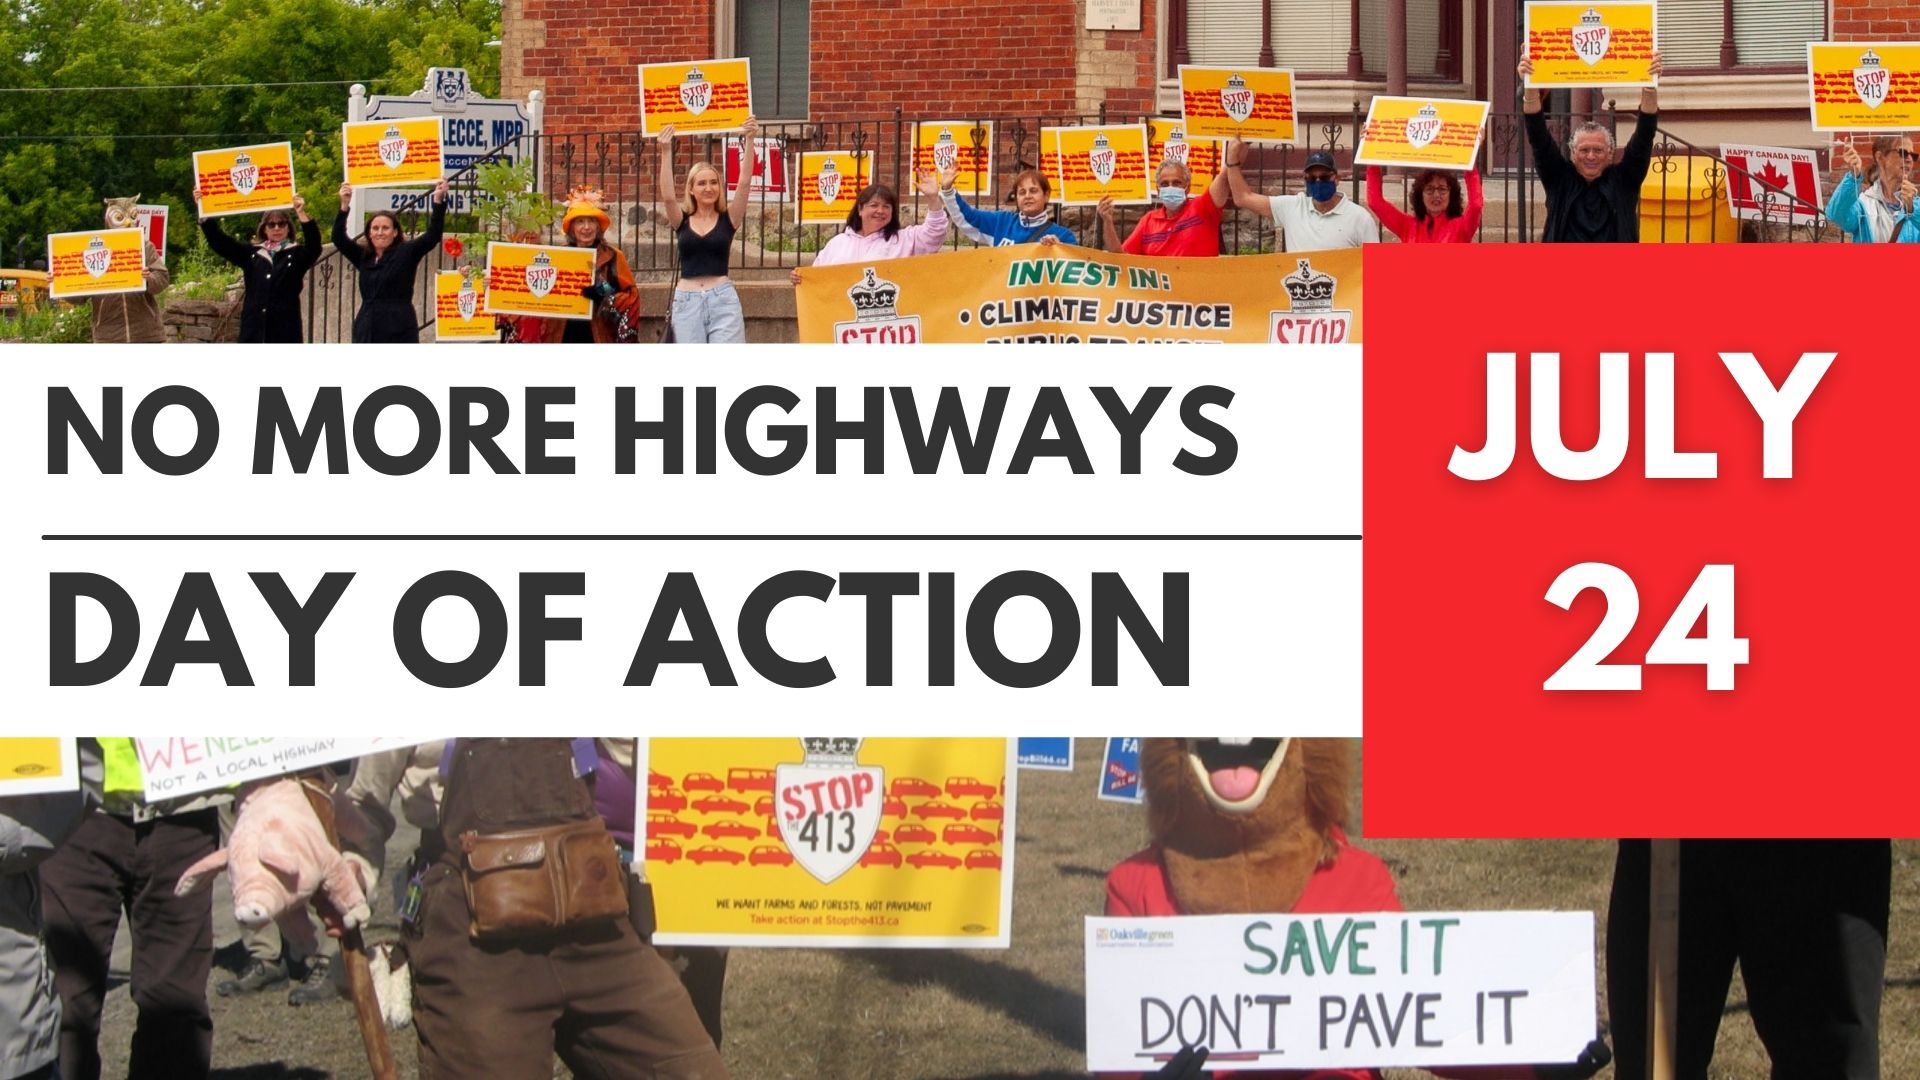 DAY OF ACTION STOP HIGHWAY 413(3)